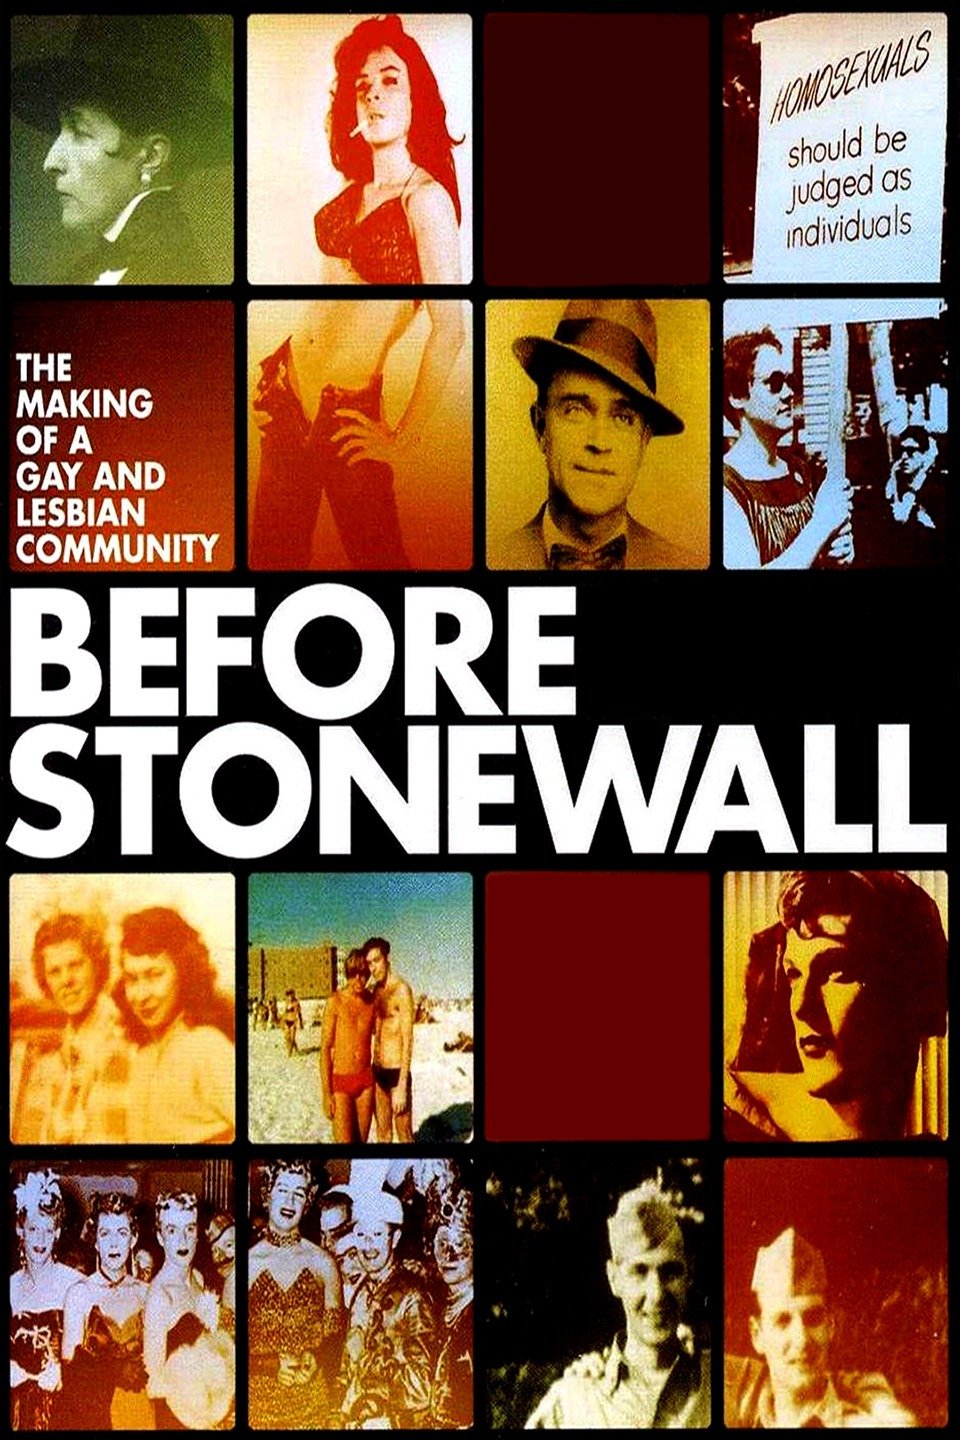 Before Stonewall" Screens Across City to Commemorate 50th ...